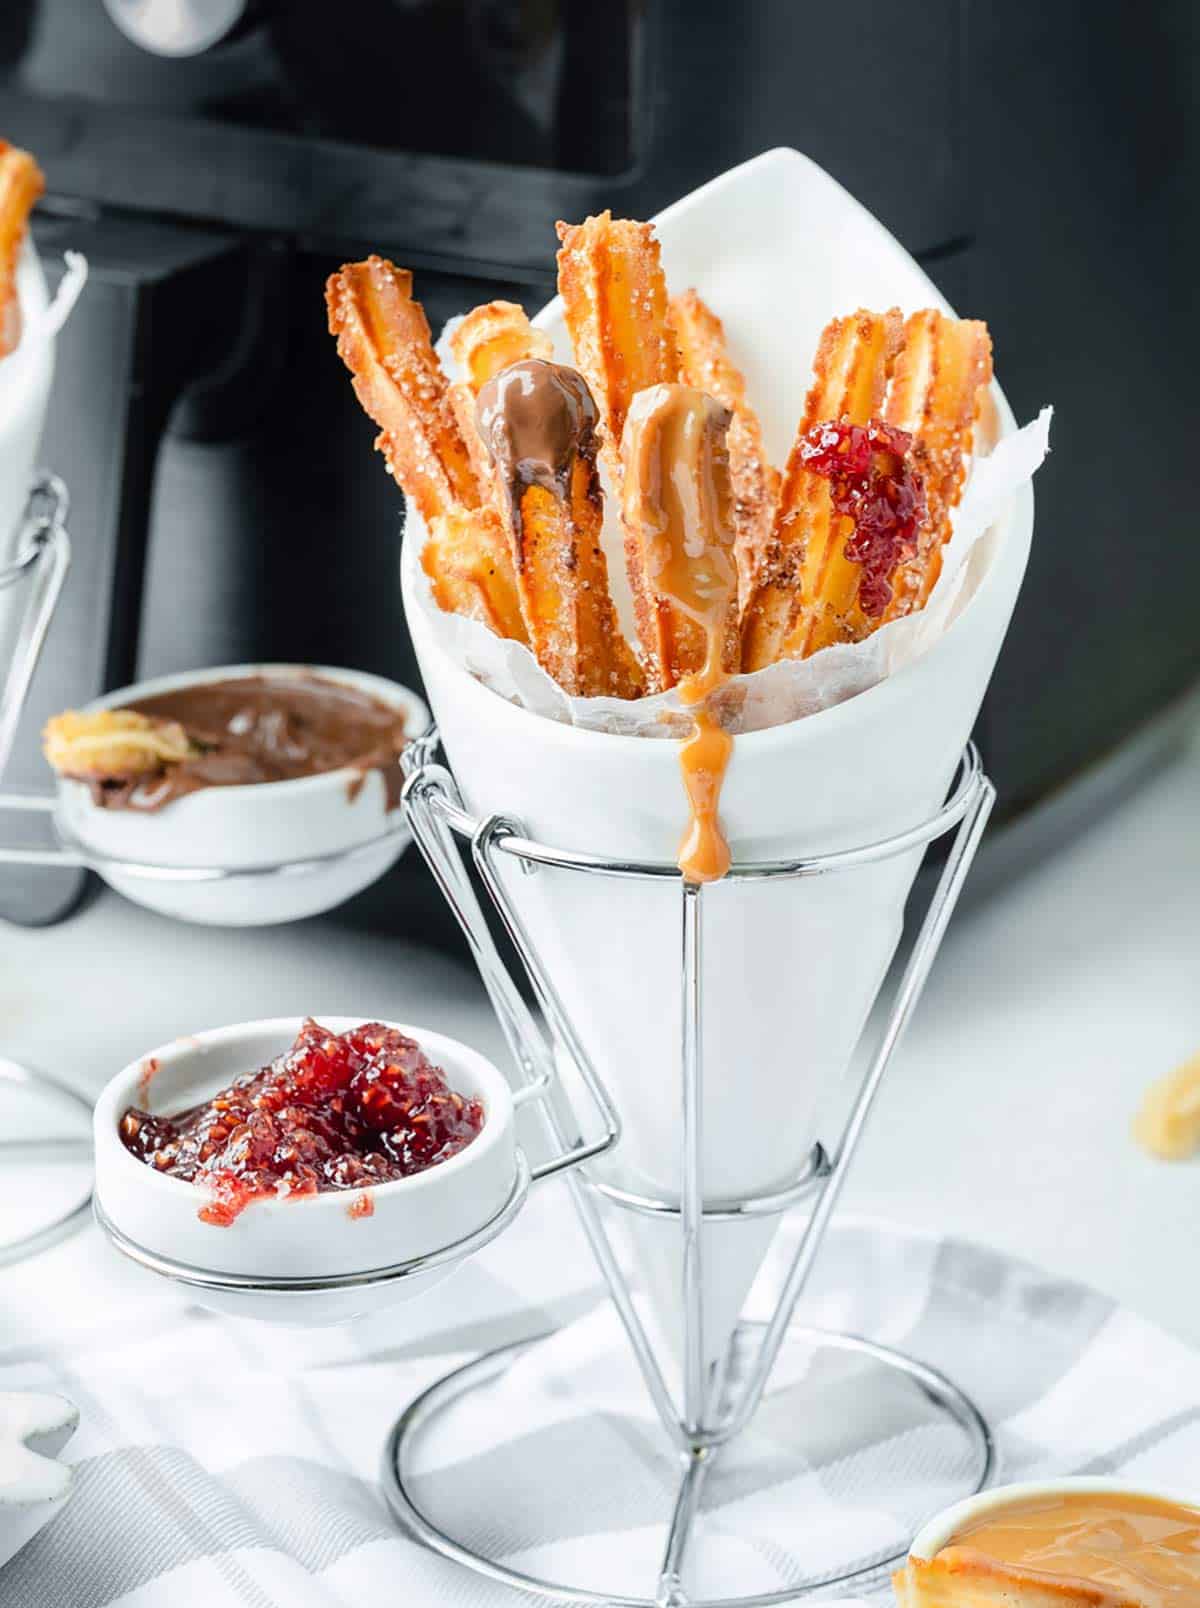 Crispy air fryer churros with cinnamon sugar. Served with dulce de leche, Nutella and jam.